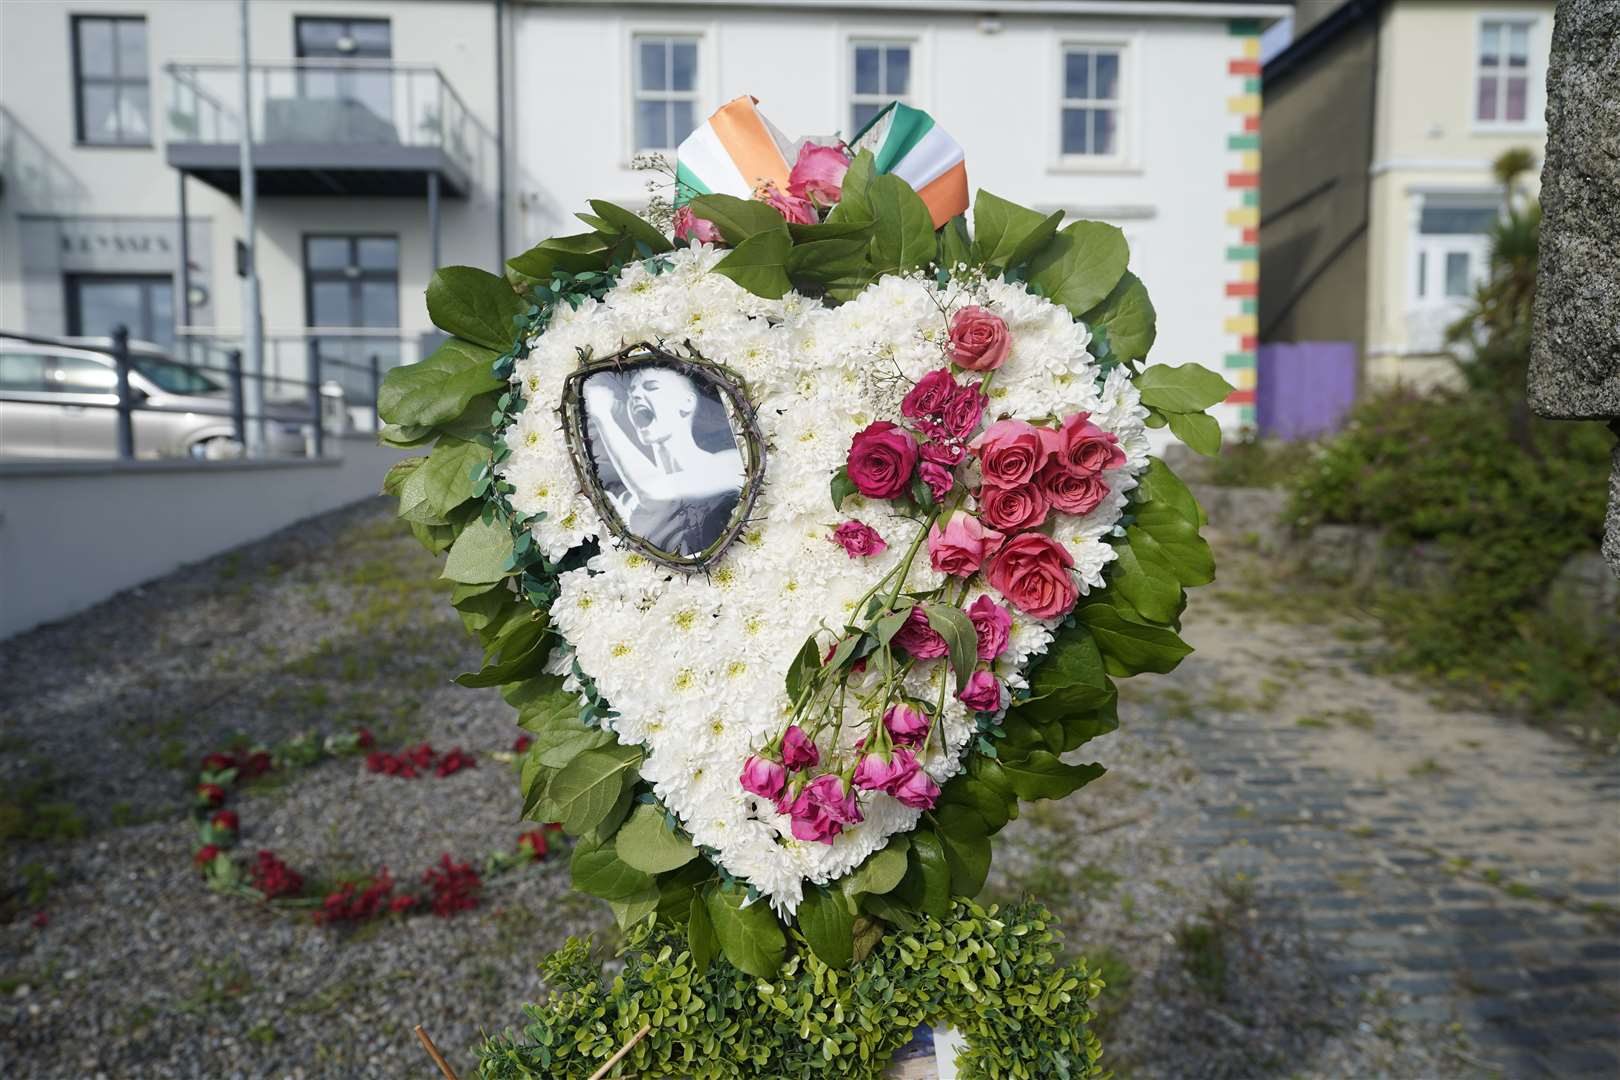 Floral tributes left outside her former home in honour of Sinead O’Connor (Niall Carson/PA)